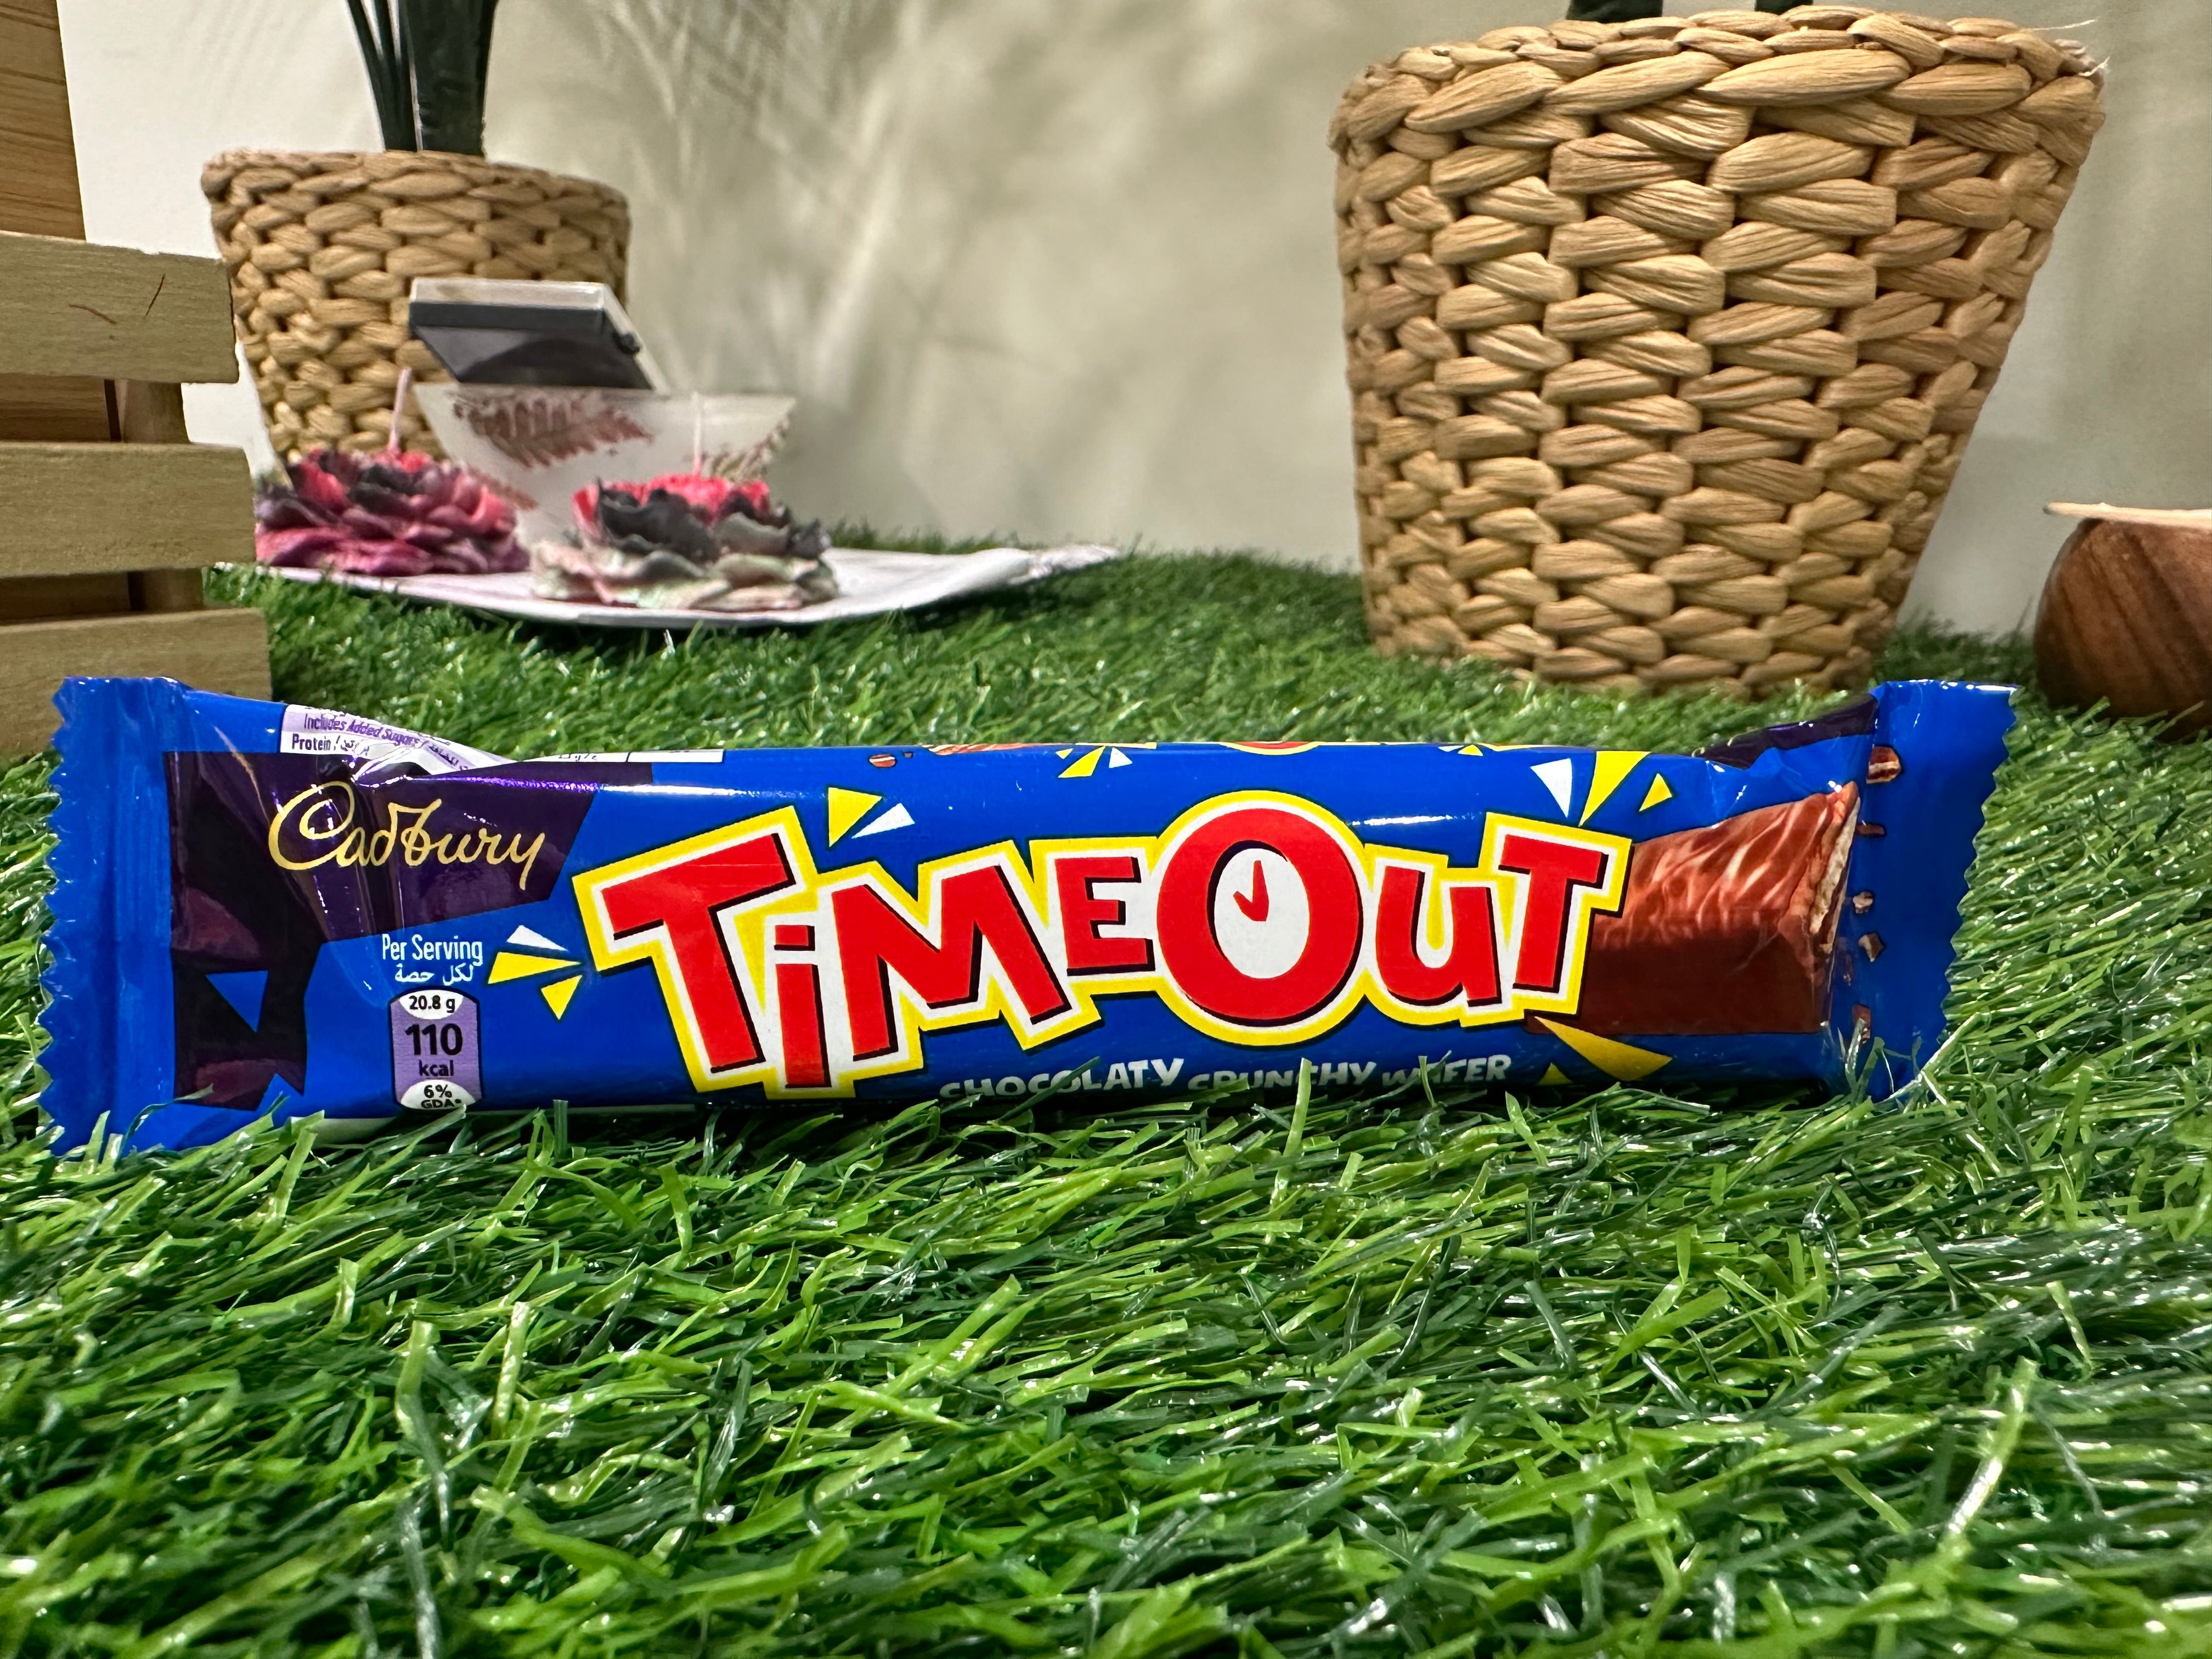 Time out wafer